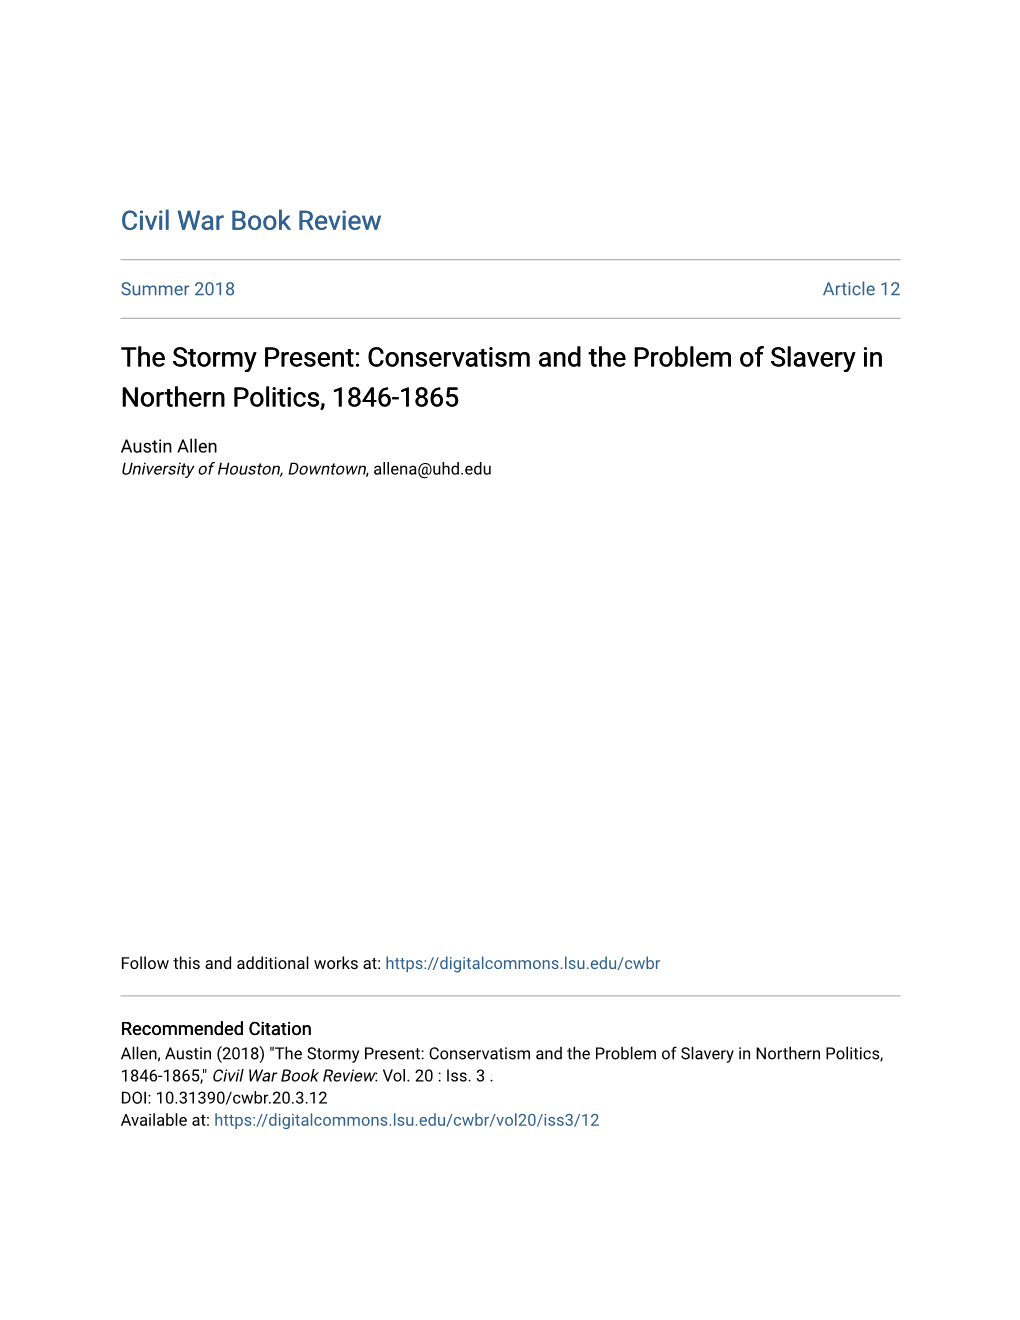 The Stormy Present: Conservatism and the Problem of Slavery in Northern Politics, 1846-1865